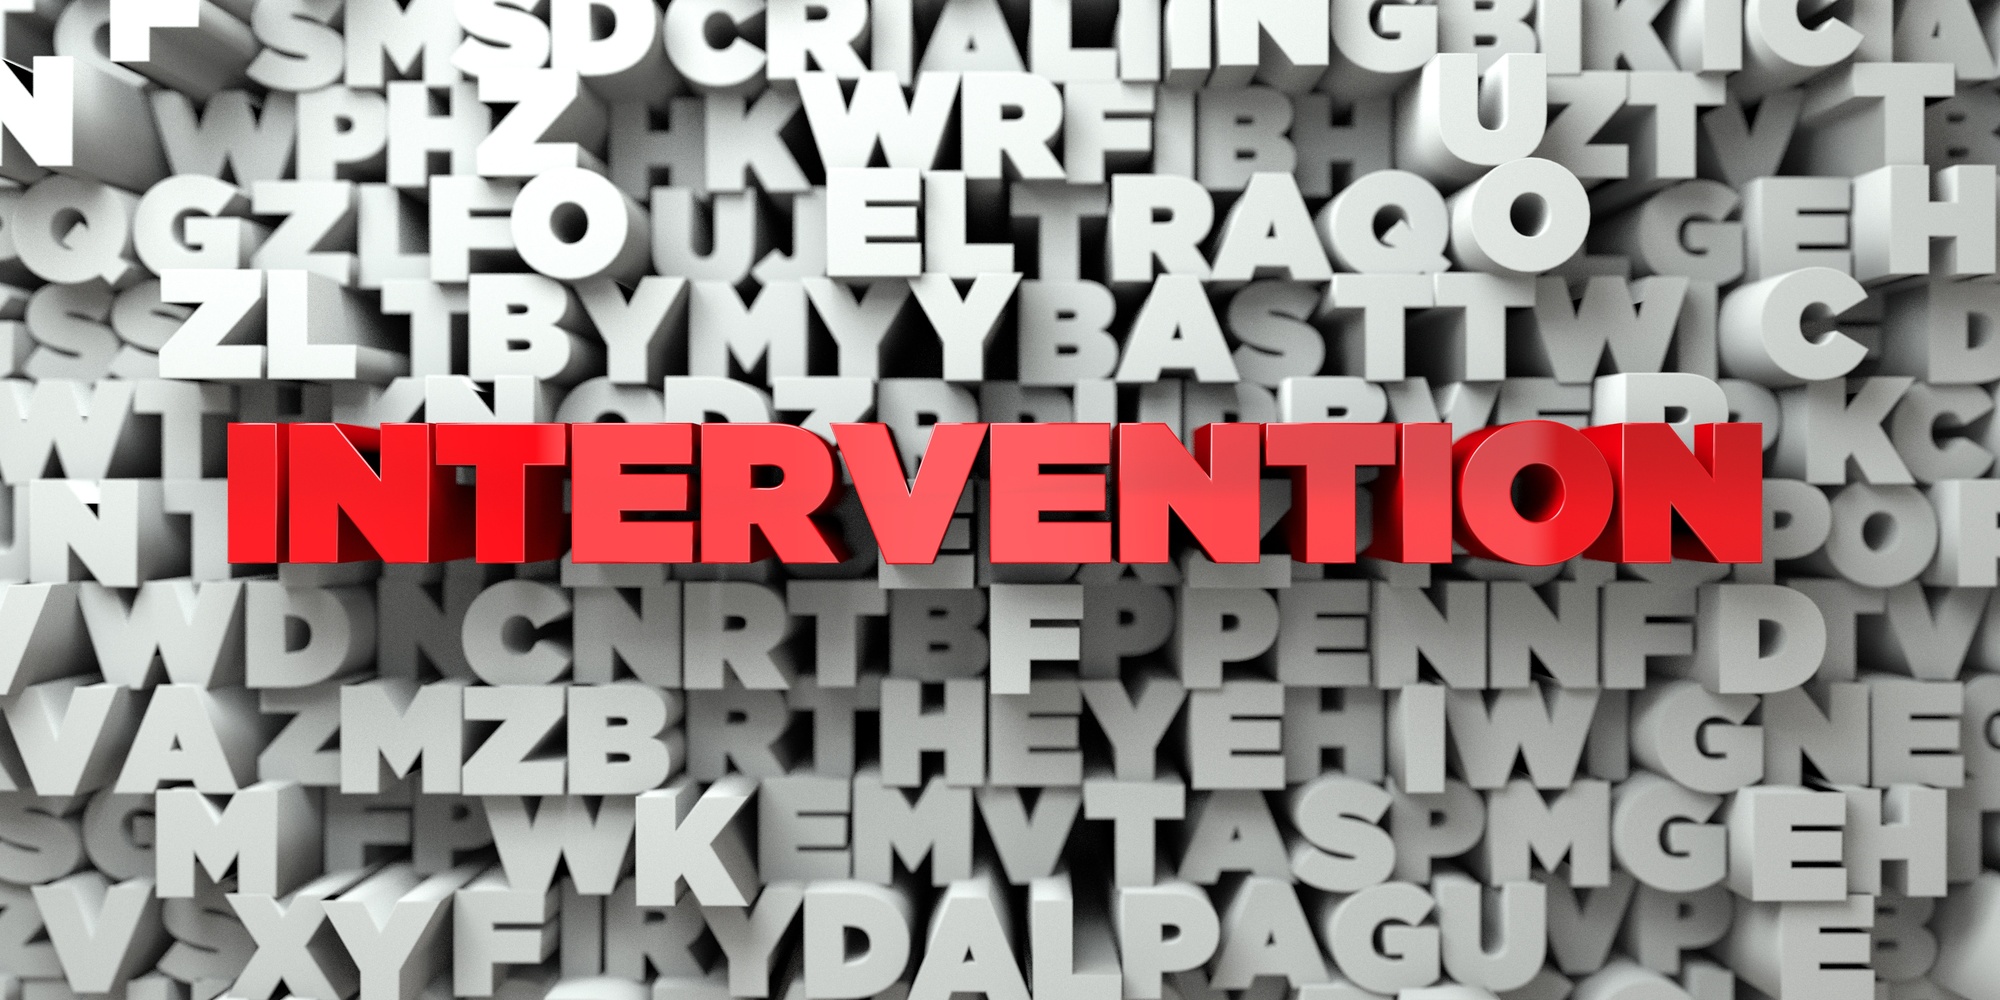 Why Should You Do an Intervention? Here Are 3 Reasons to Think About!